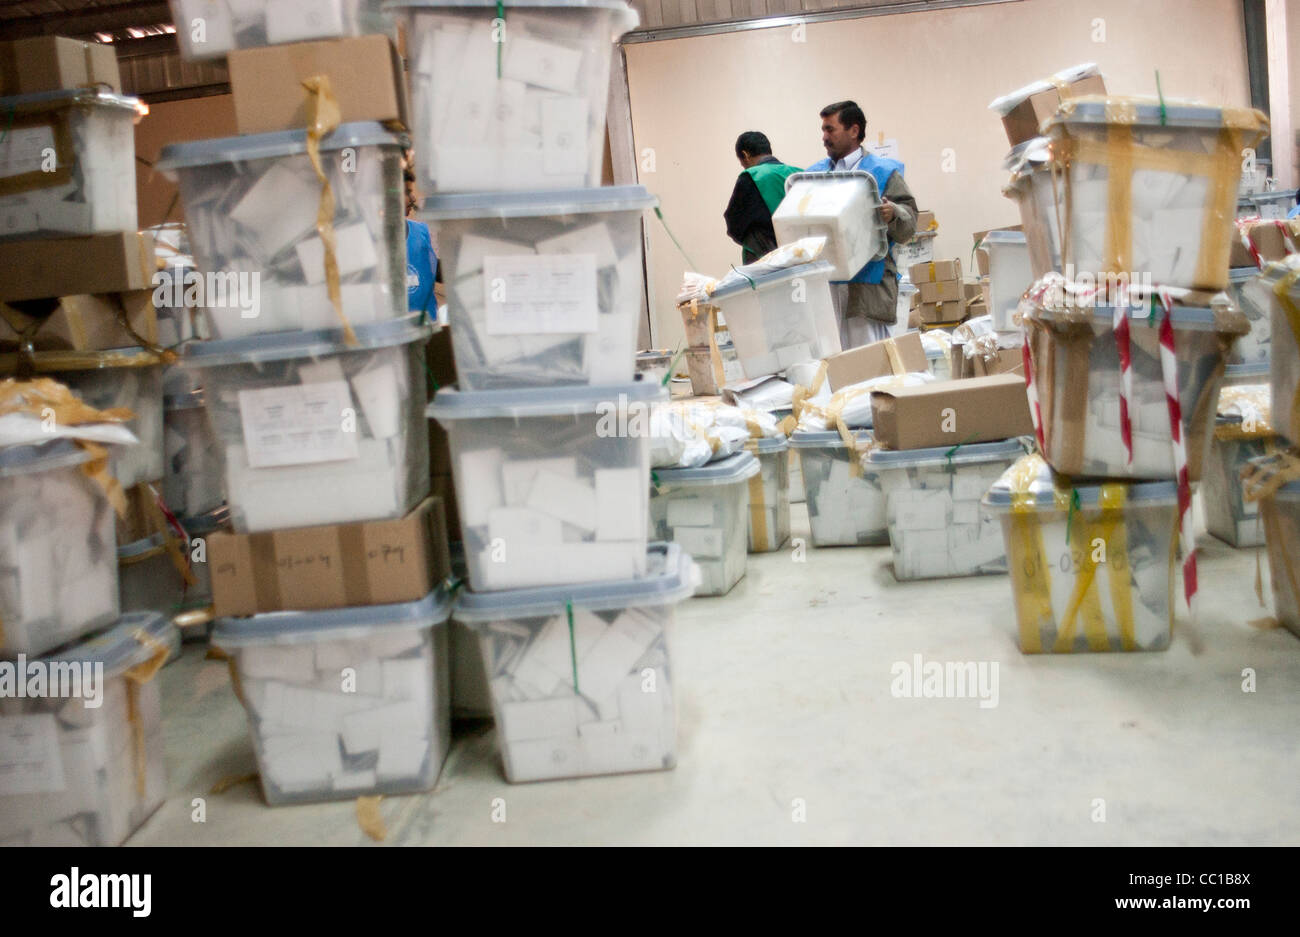 United Nations workers sort election ballots at a warehouse in Kabul, Afghanistan Stock Photo